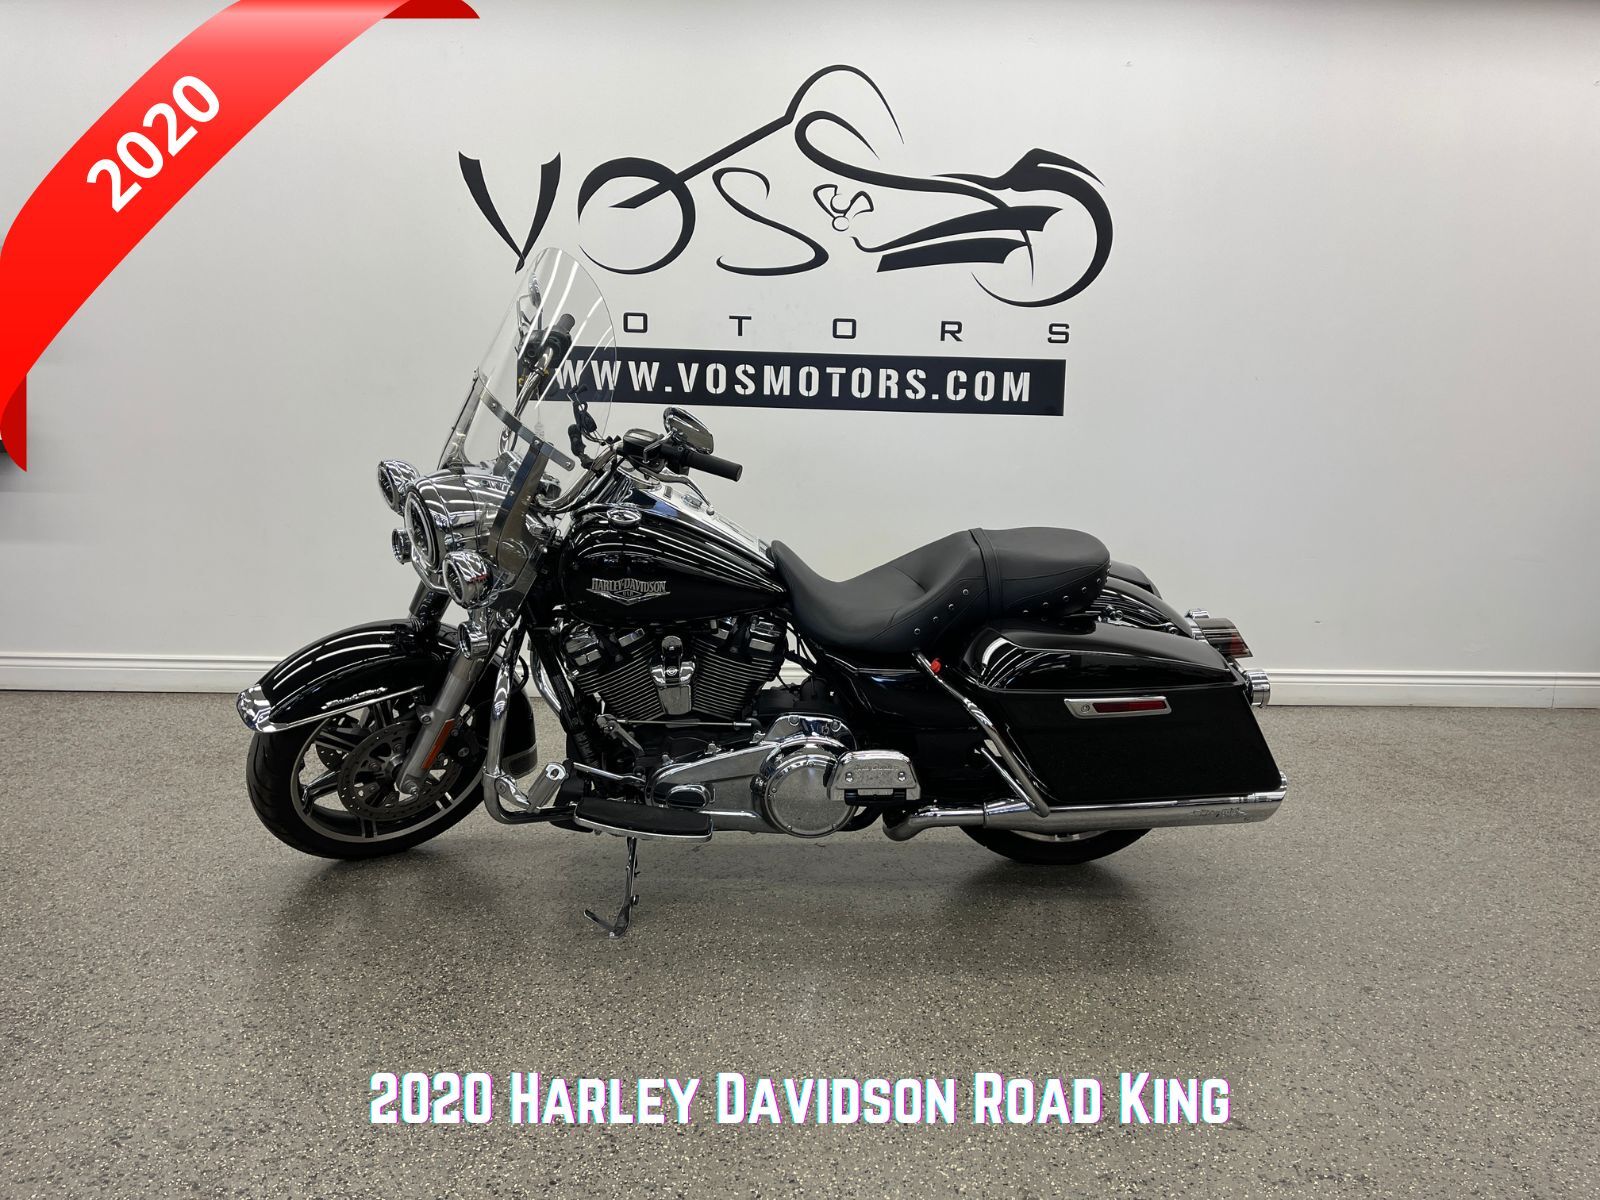 2020 Harley-Davidson FLHR Road King Road King ABS 107 - V5860 - -No Payments for 1 Yea